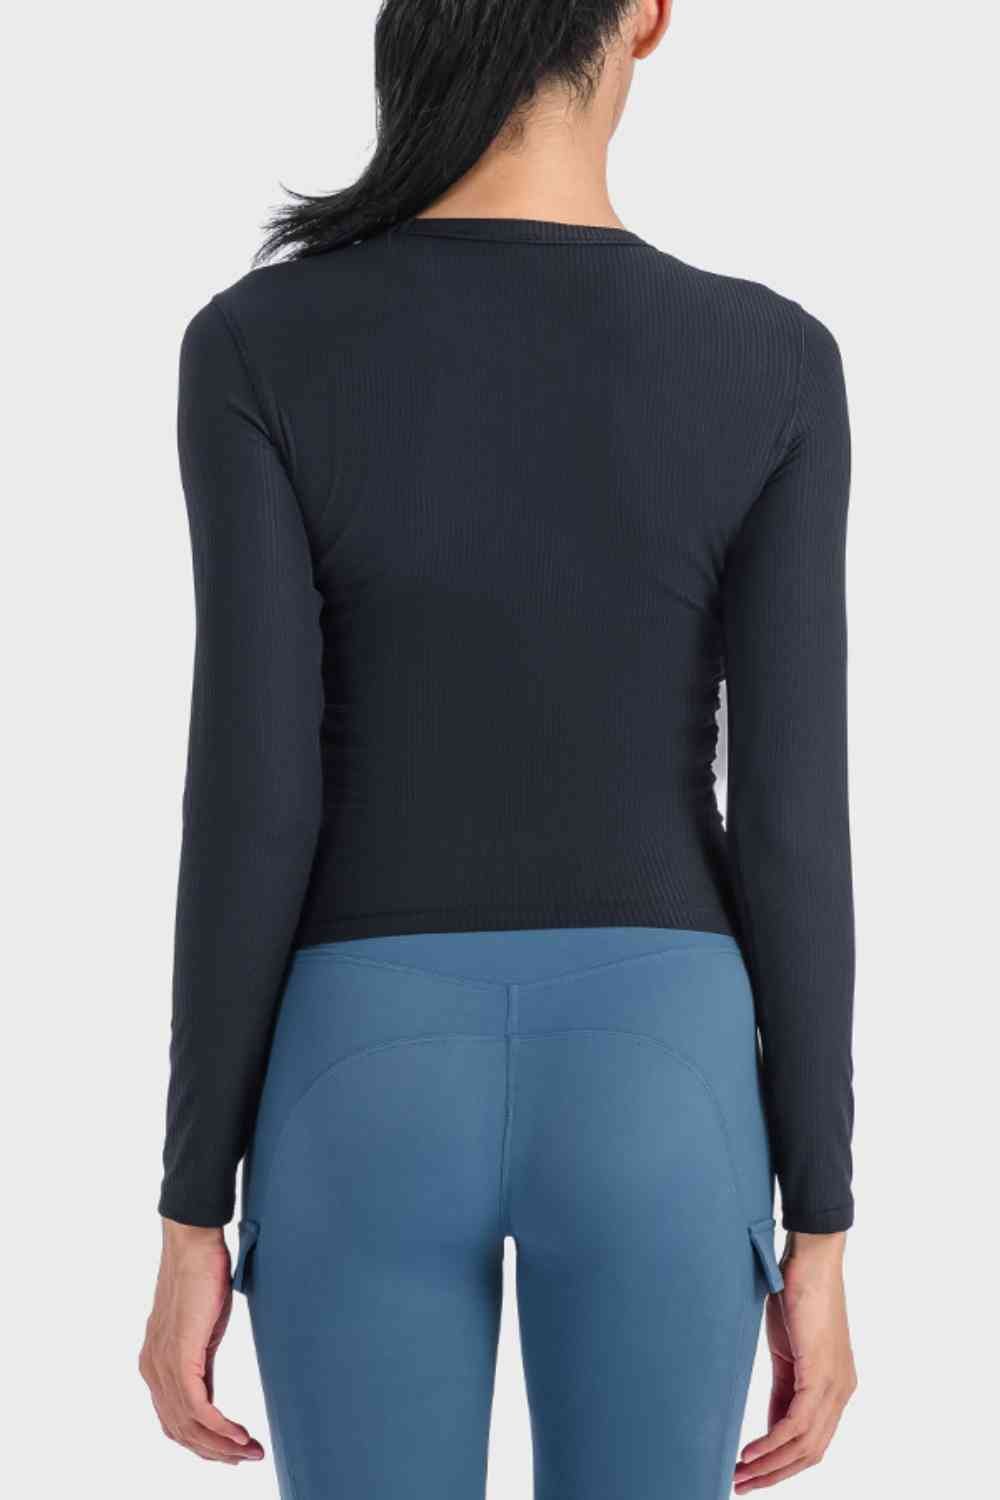 Highly Stretchy Basic Style Long Sleeve Sports Top GOTIQUE Collections